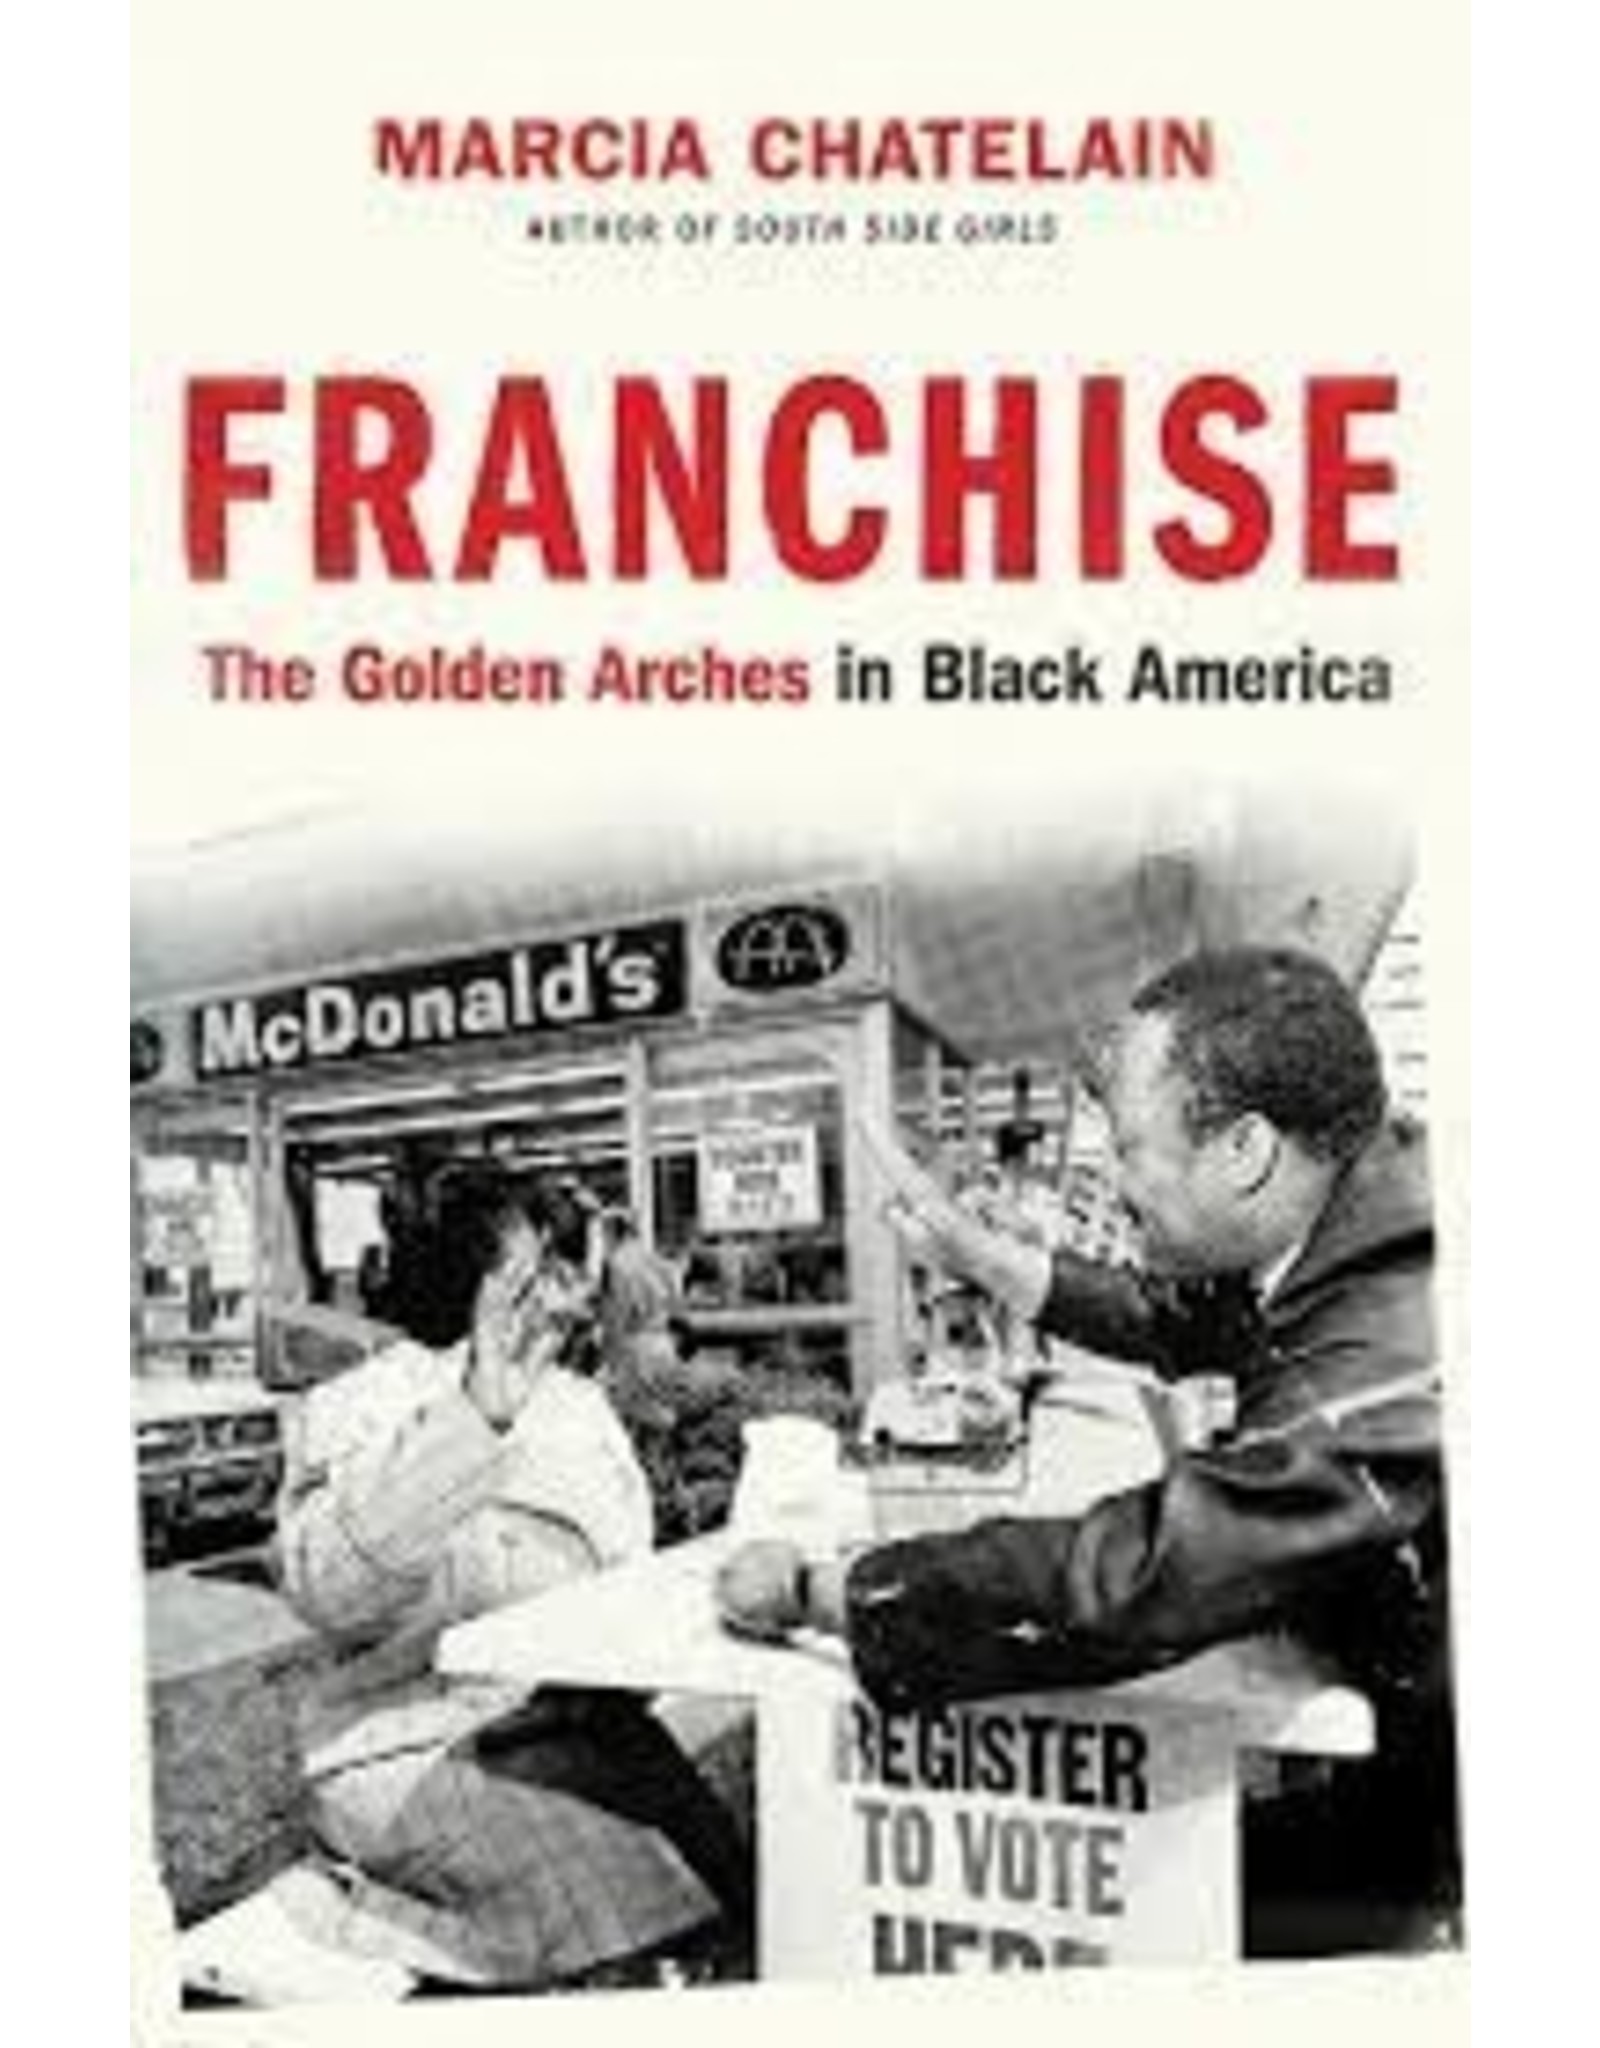 Books Franchise: The Golden Arches in Black America by Marcia Chatelain